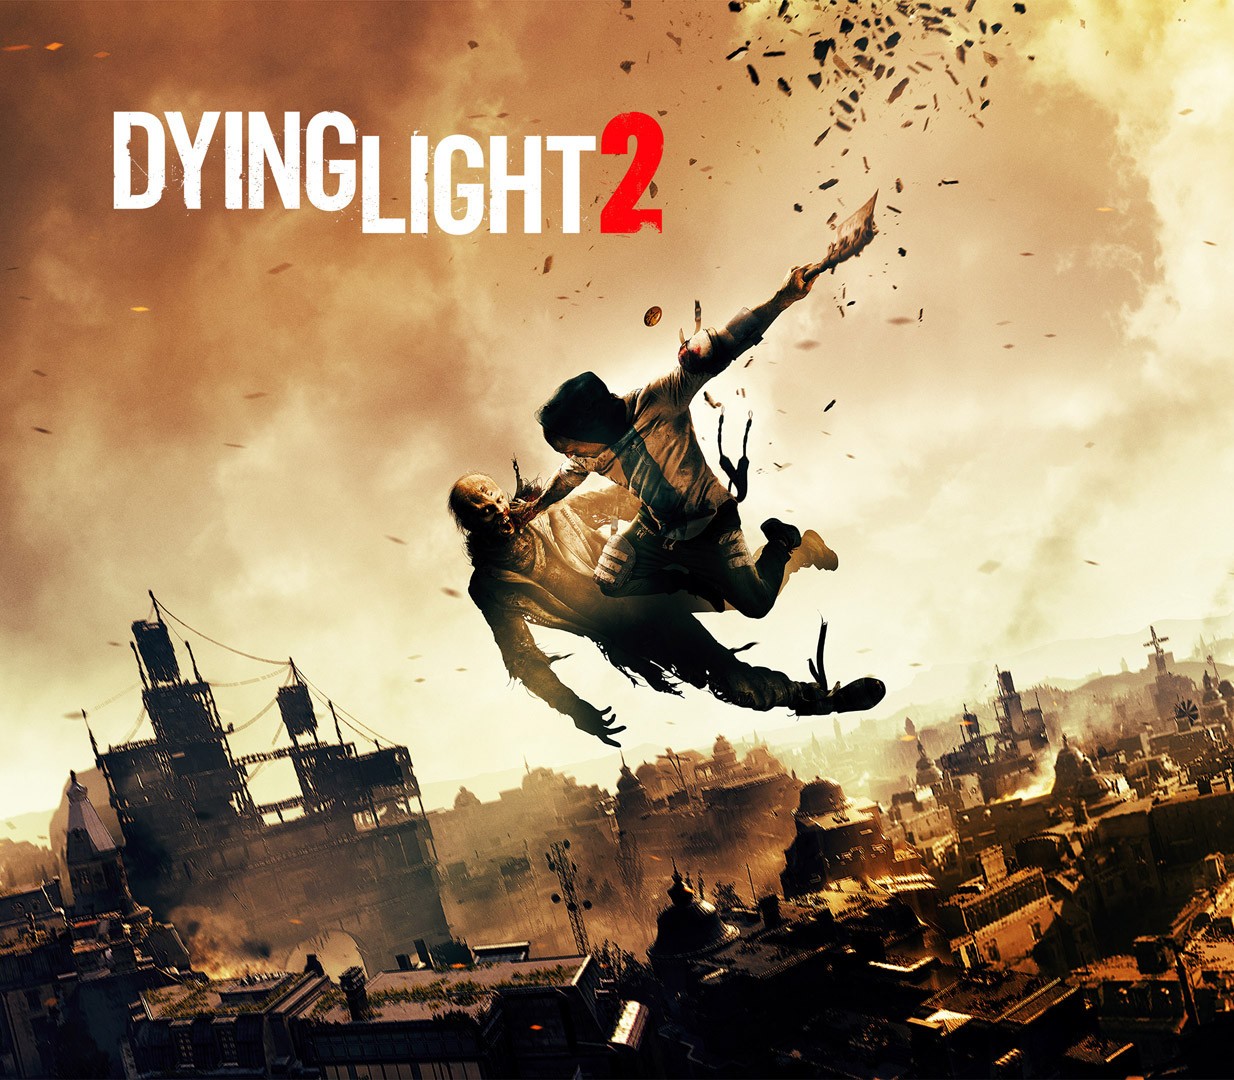 What's happened with dying Light 2 metacritic Page? : r/dyinglight